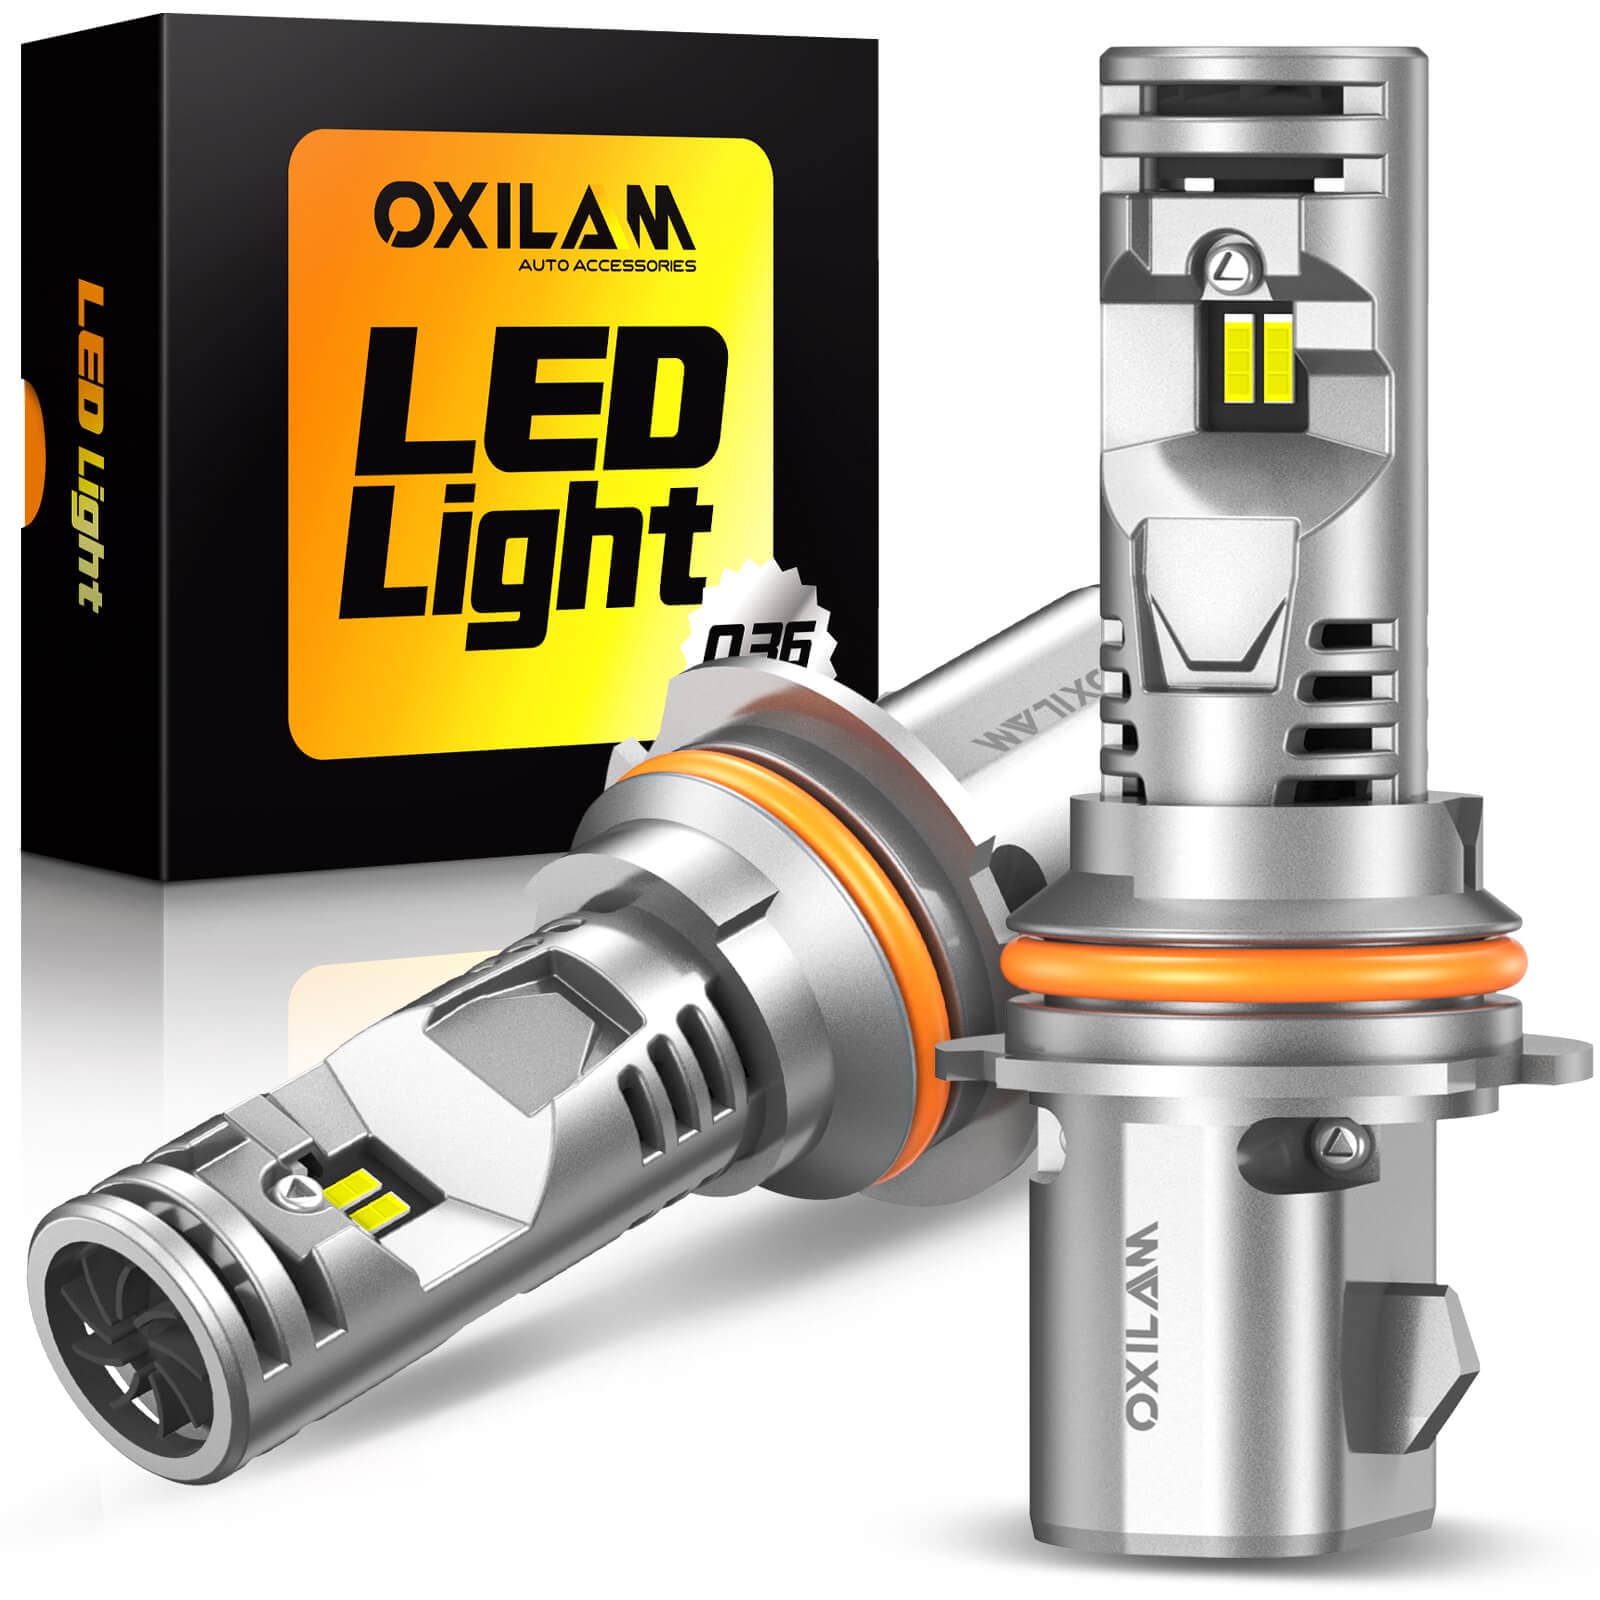 Oxilam Motor Vehicle Lighting OXILAM Upgraded 9004 LED Fog Light Bulbs, 20000 Lumens, Wireless HB1 for Halogen Replacement